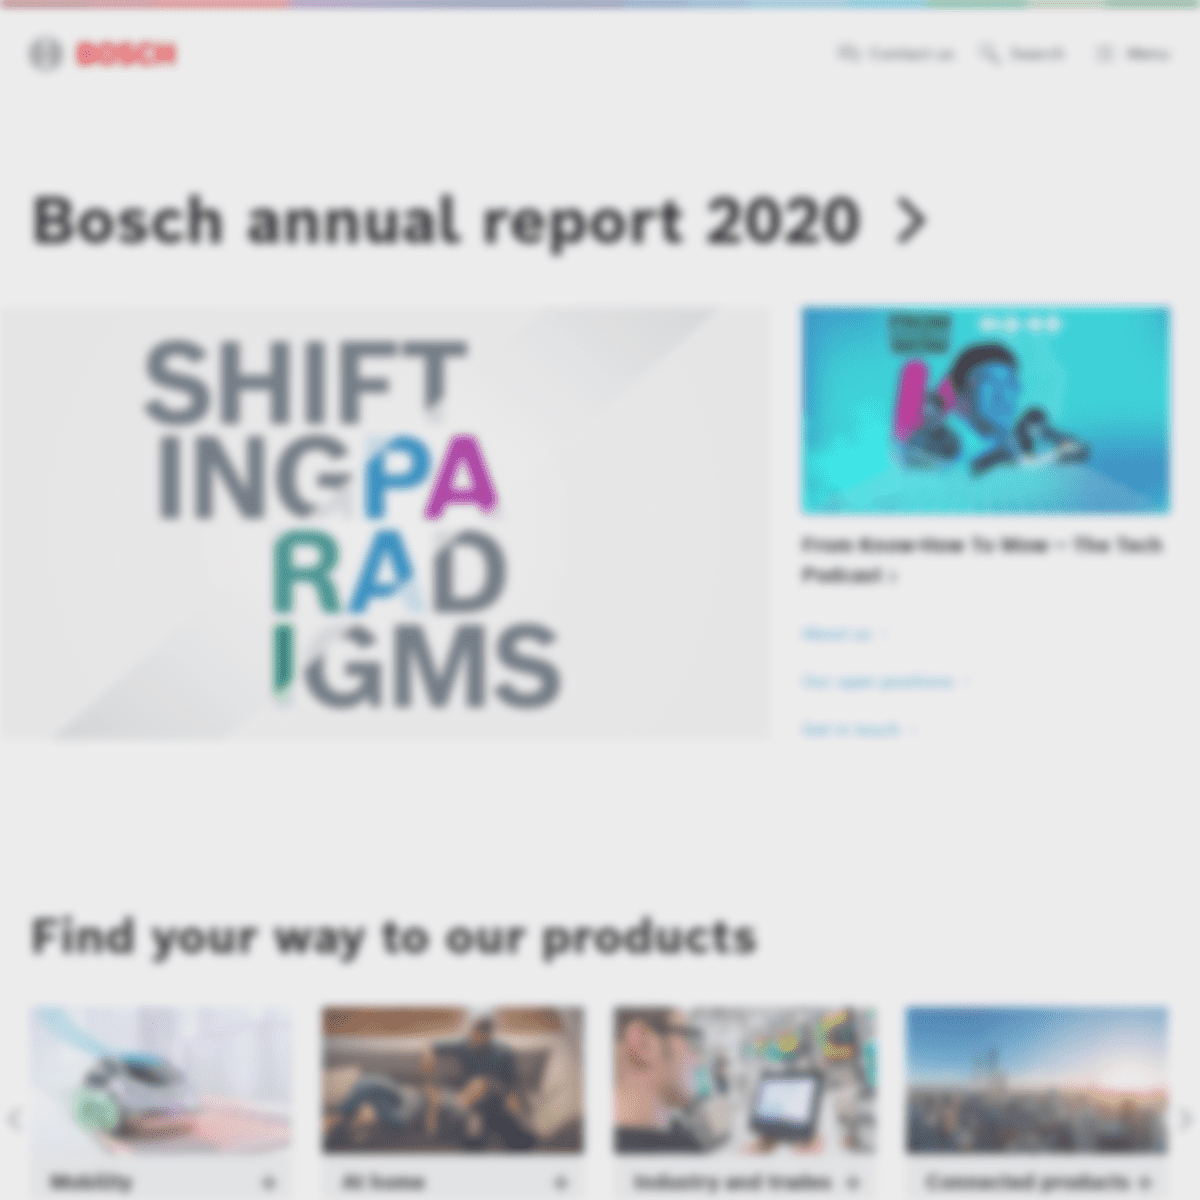 A complete backup of https://bosch.com